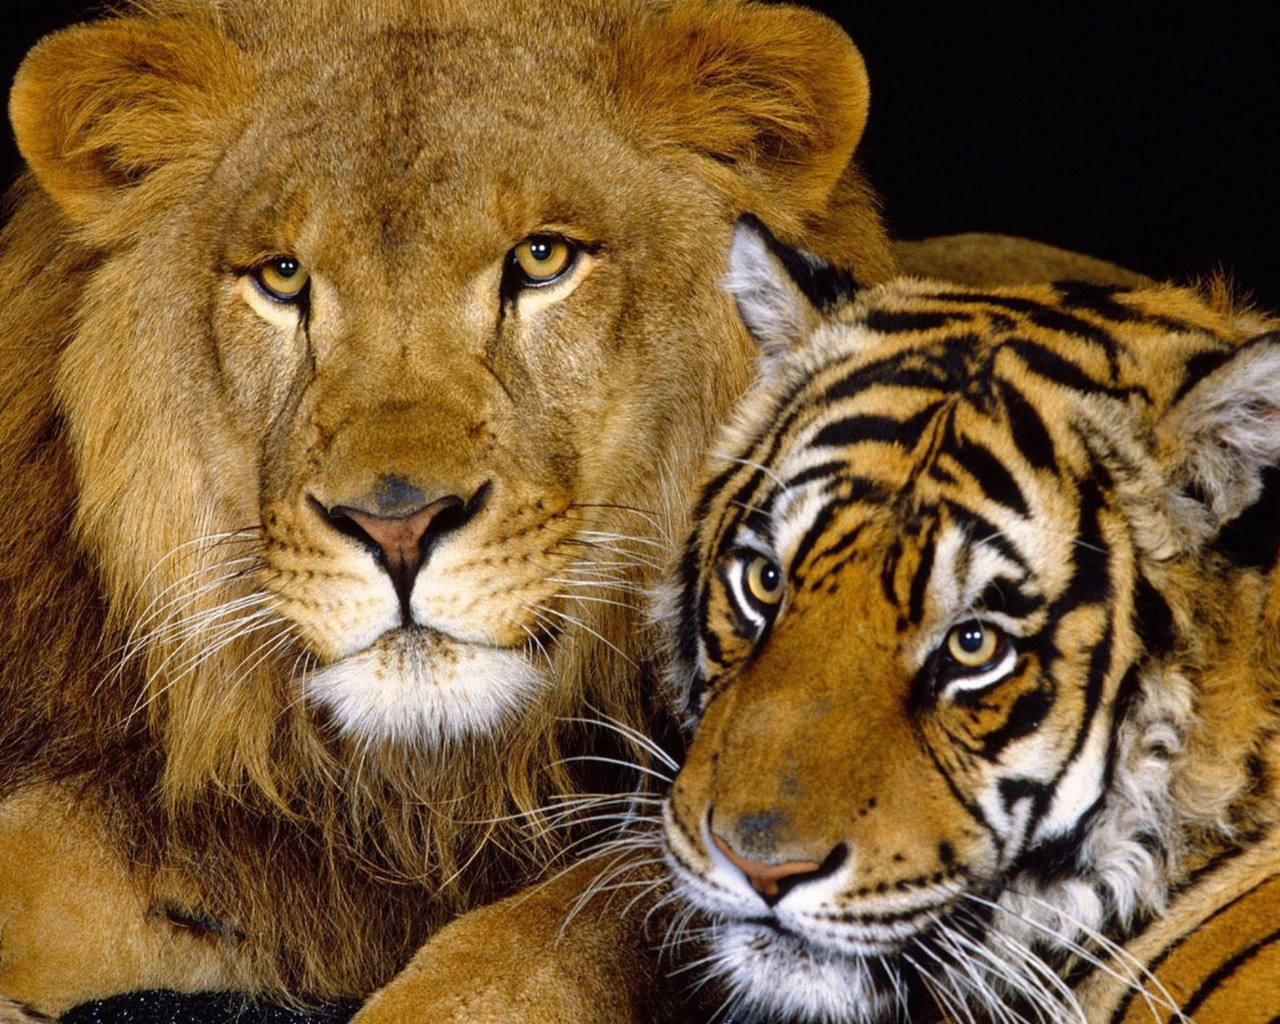 Tiger and Lion for 1280 x 1024 resolution